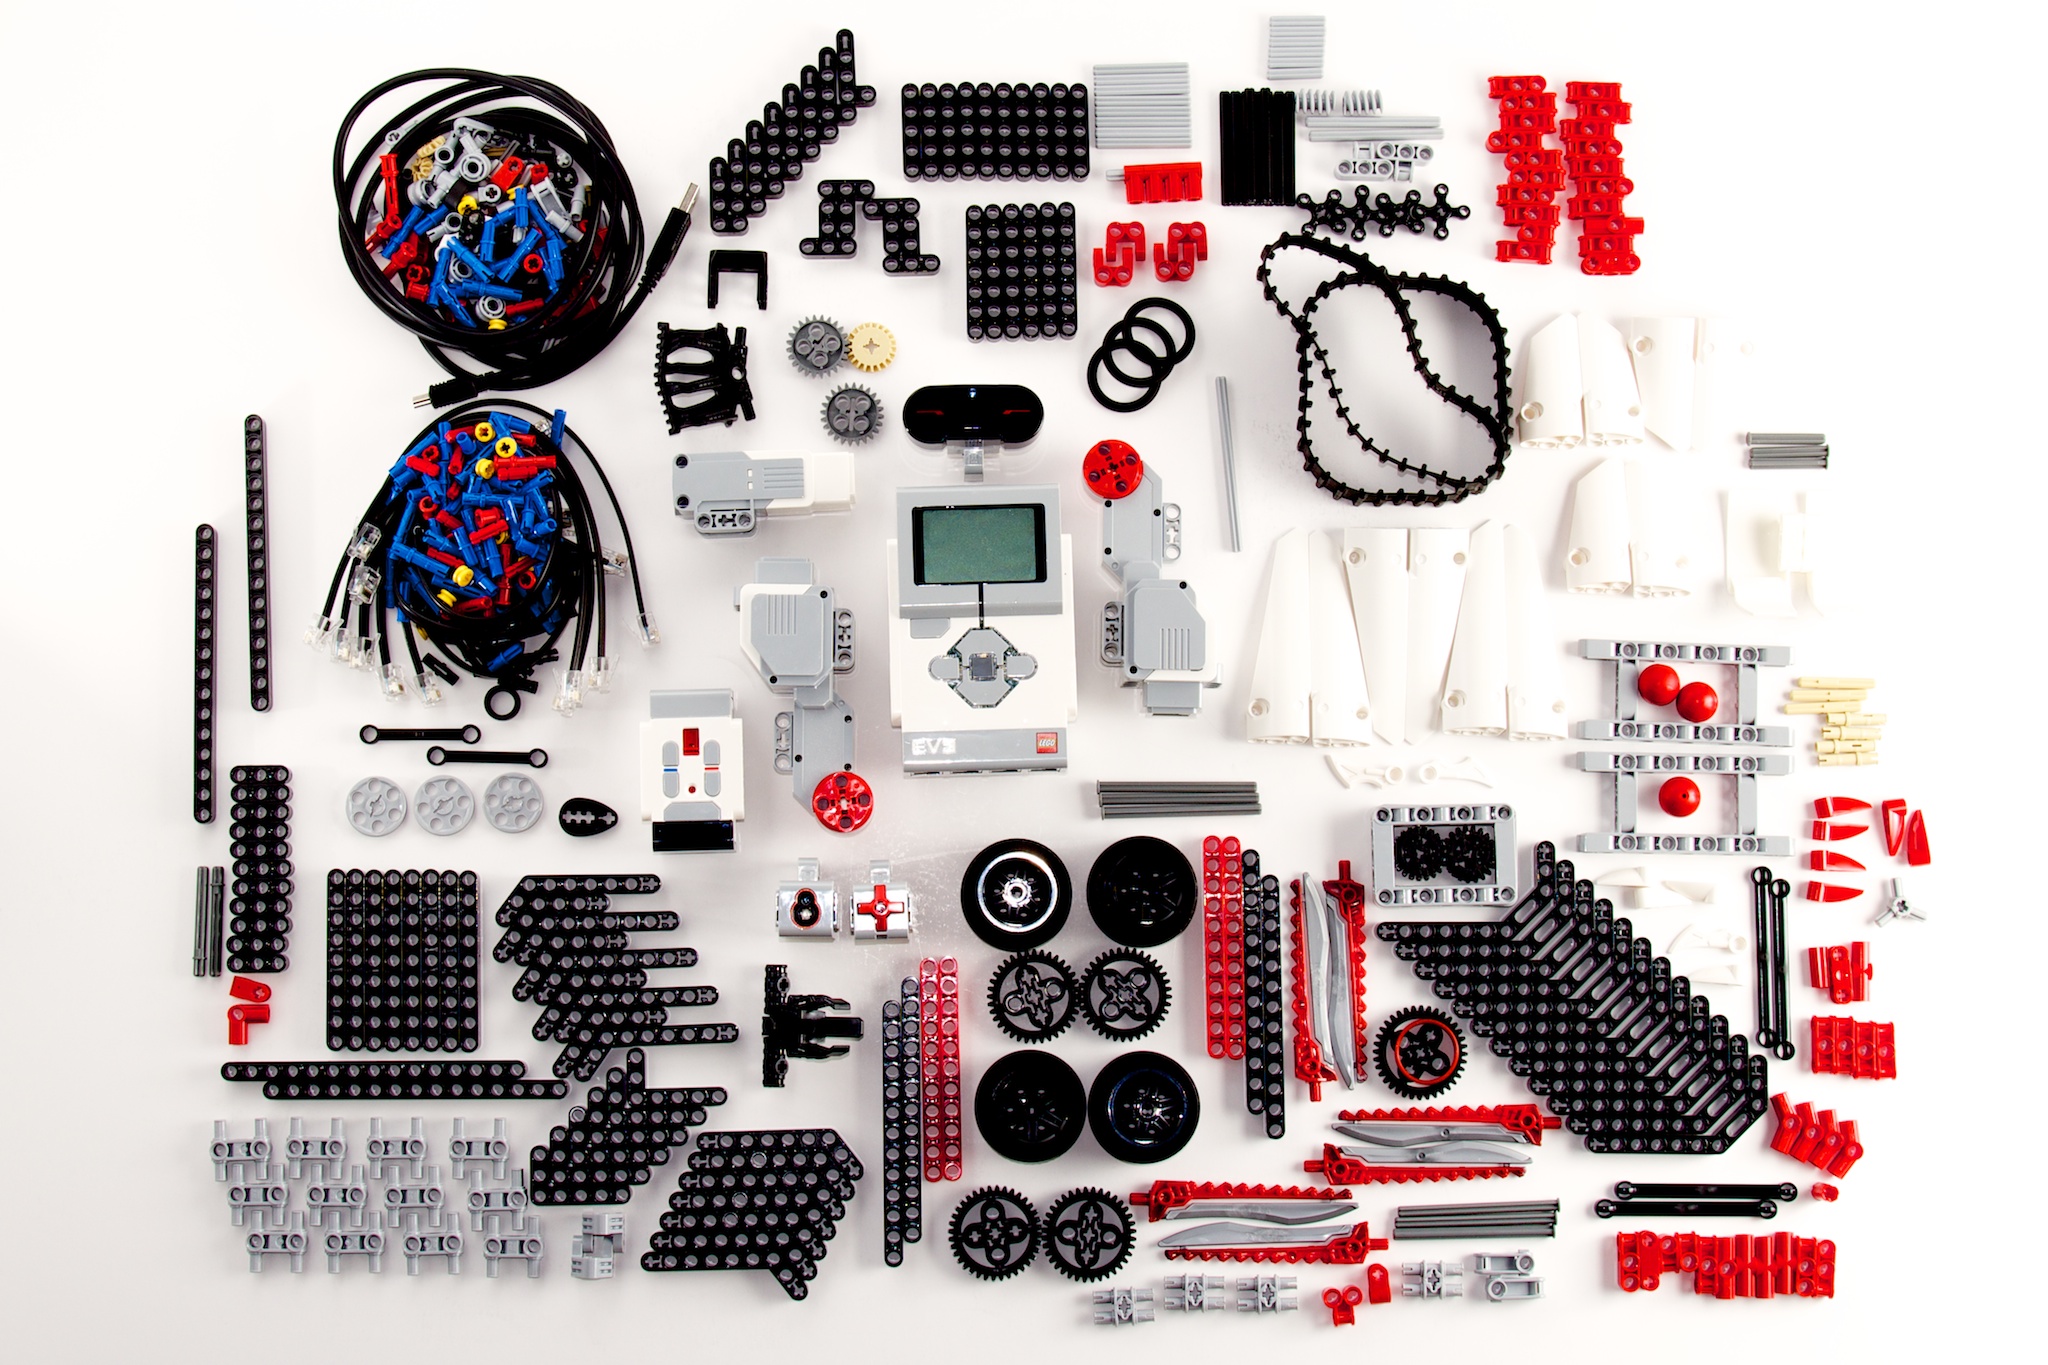 Review: Lego Mindstorms giant robots, powerful computers | Technica